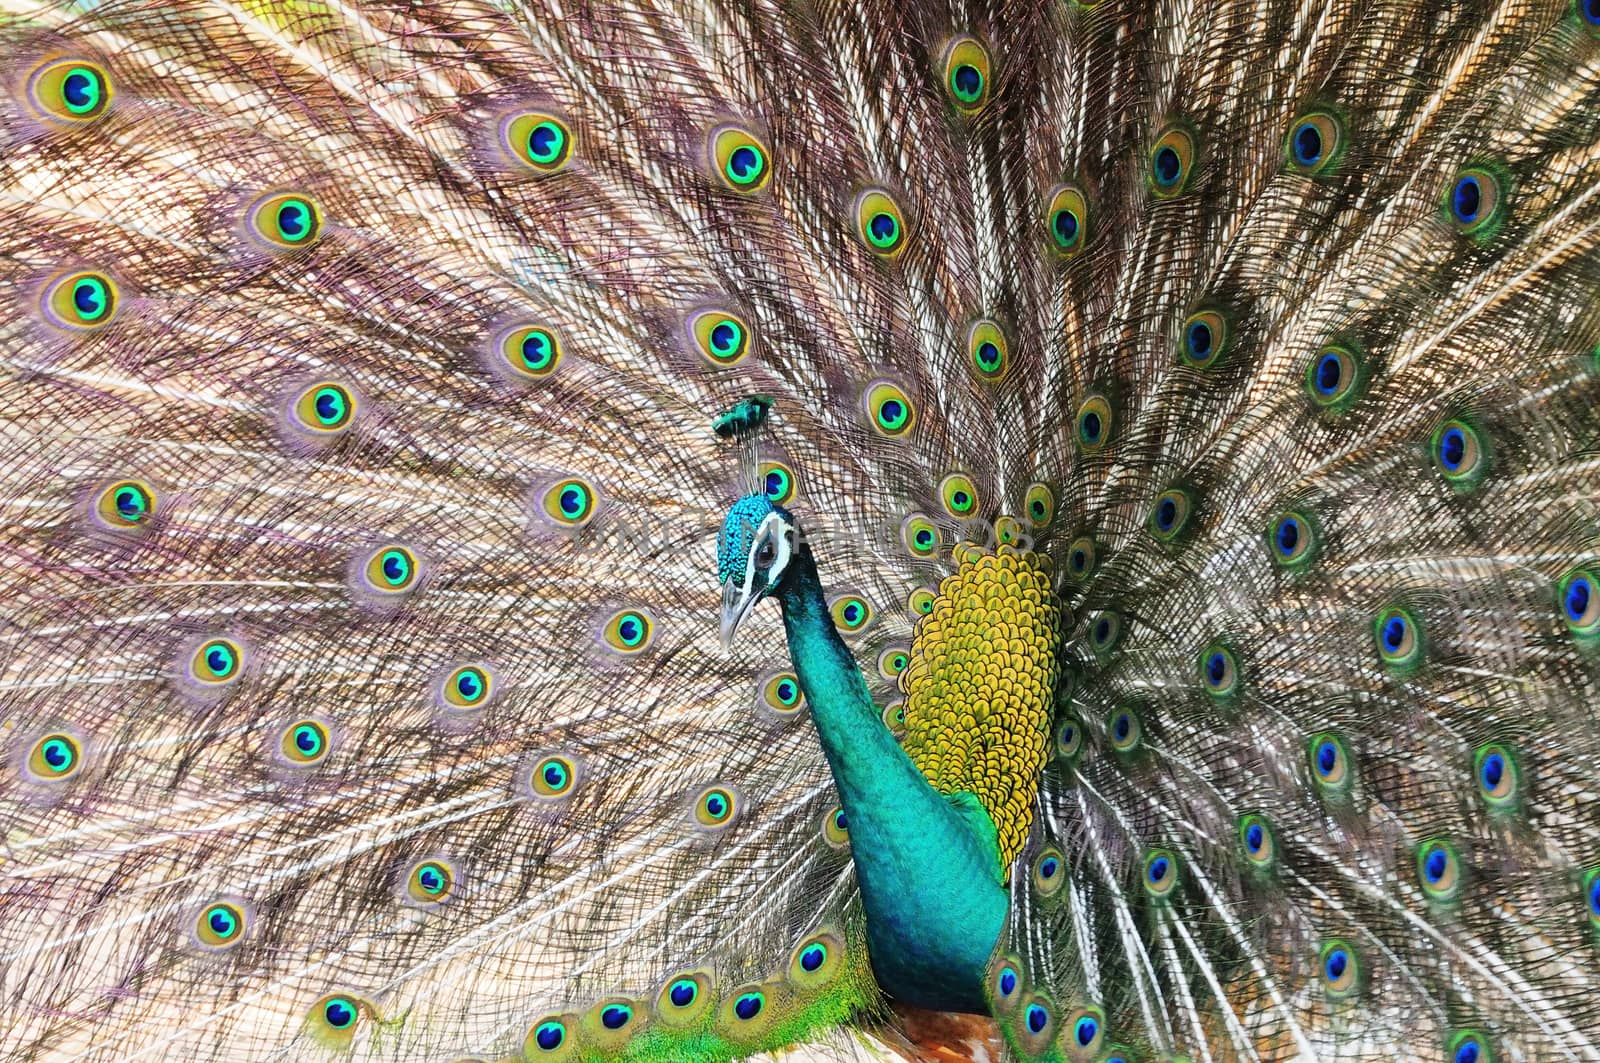 Beautiful Green Peafowl (male) with colorful tail fully open by panuruangjan